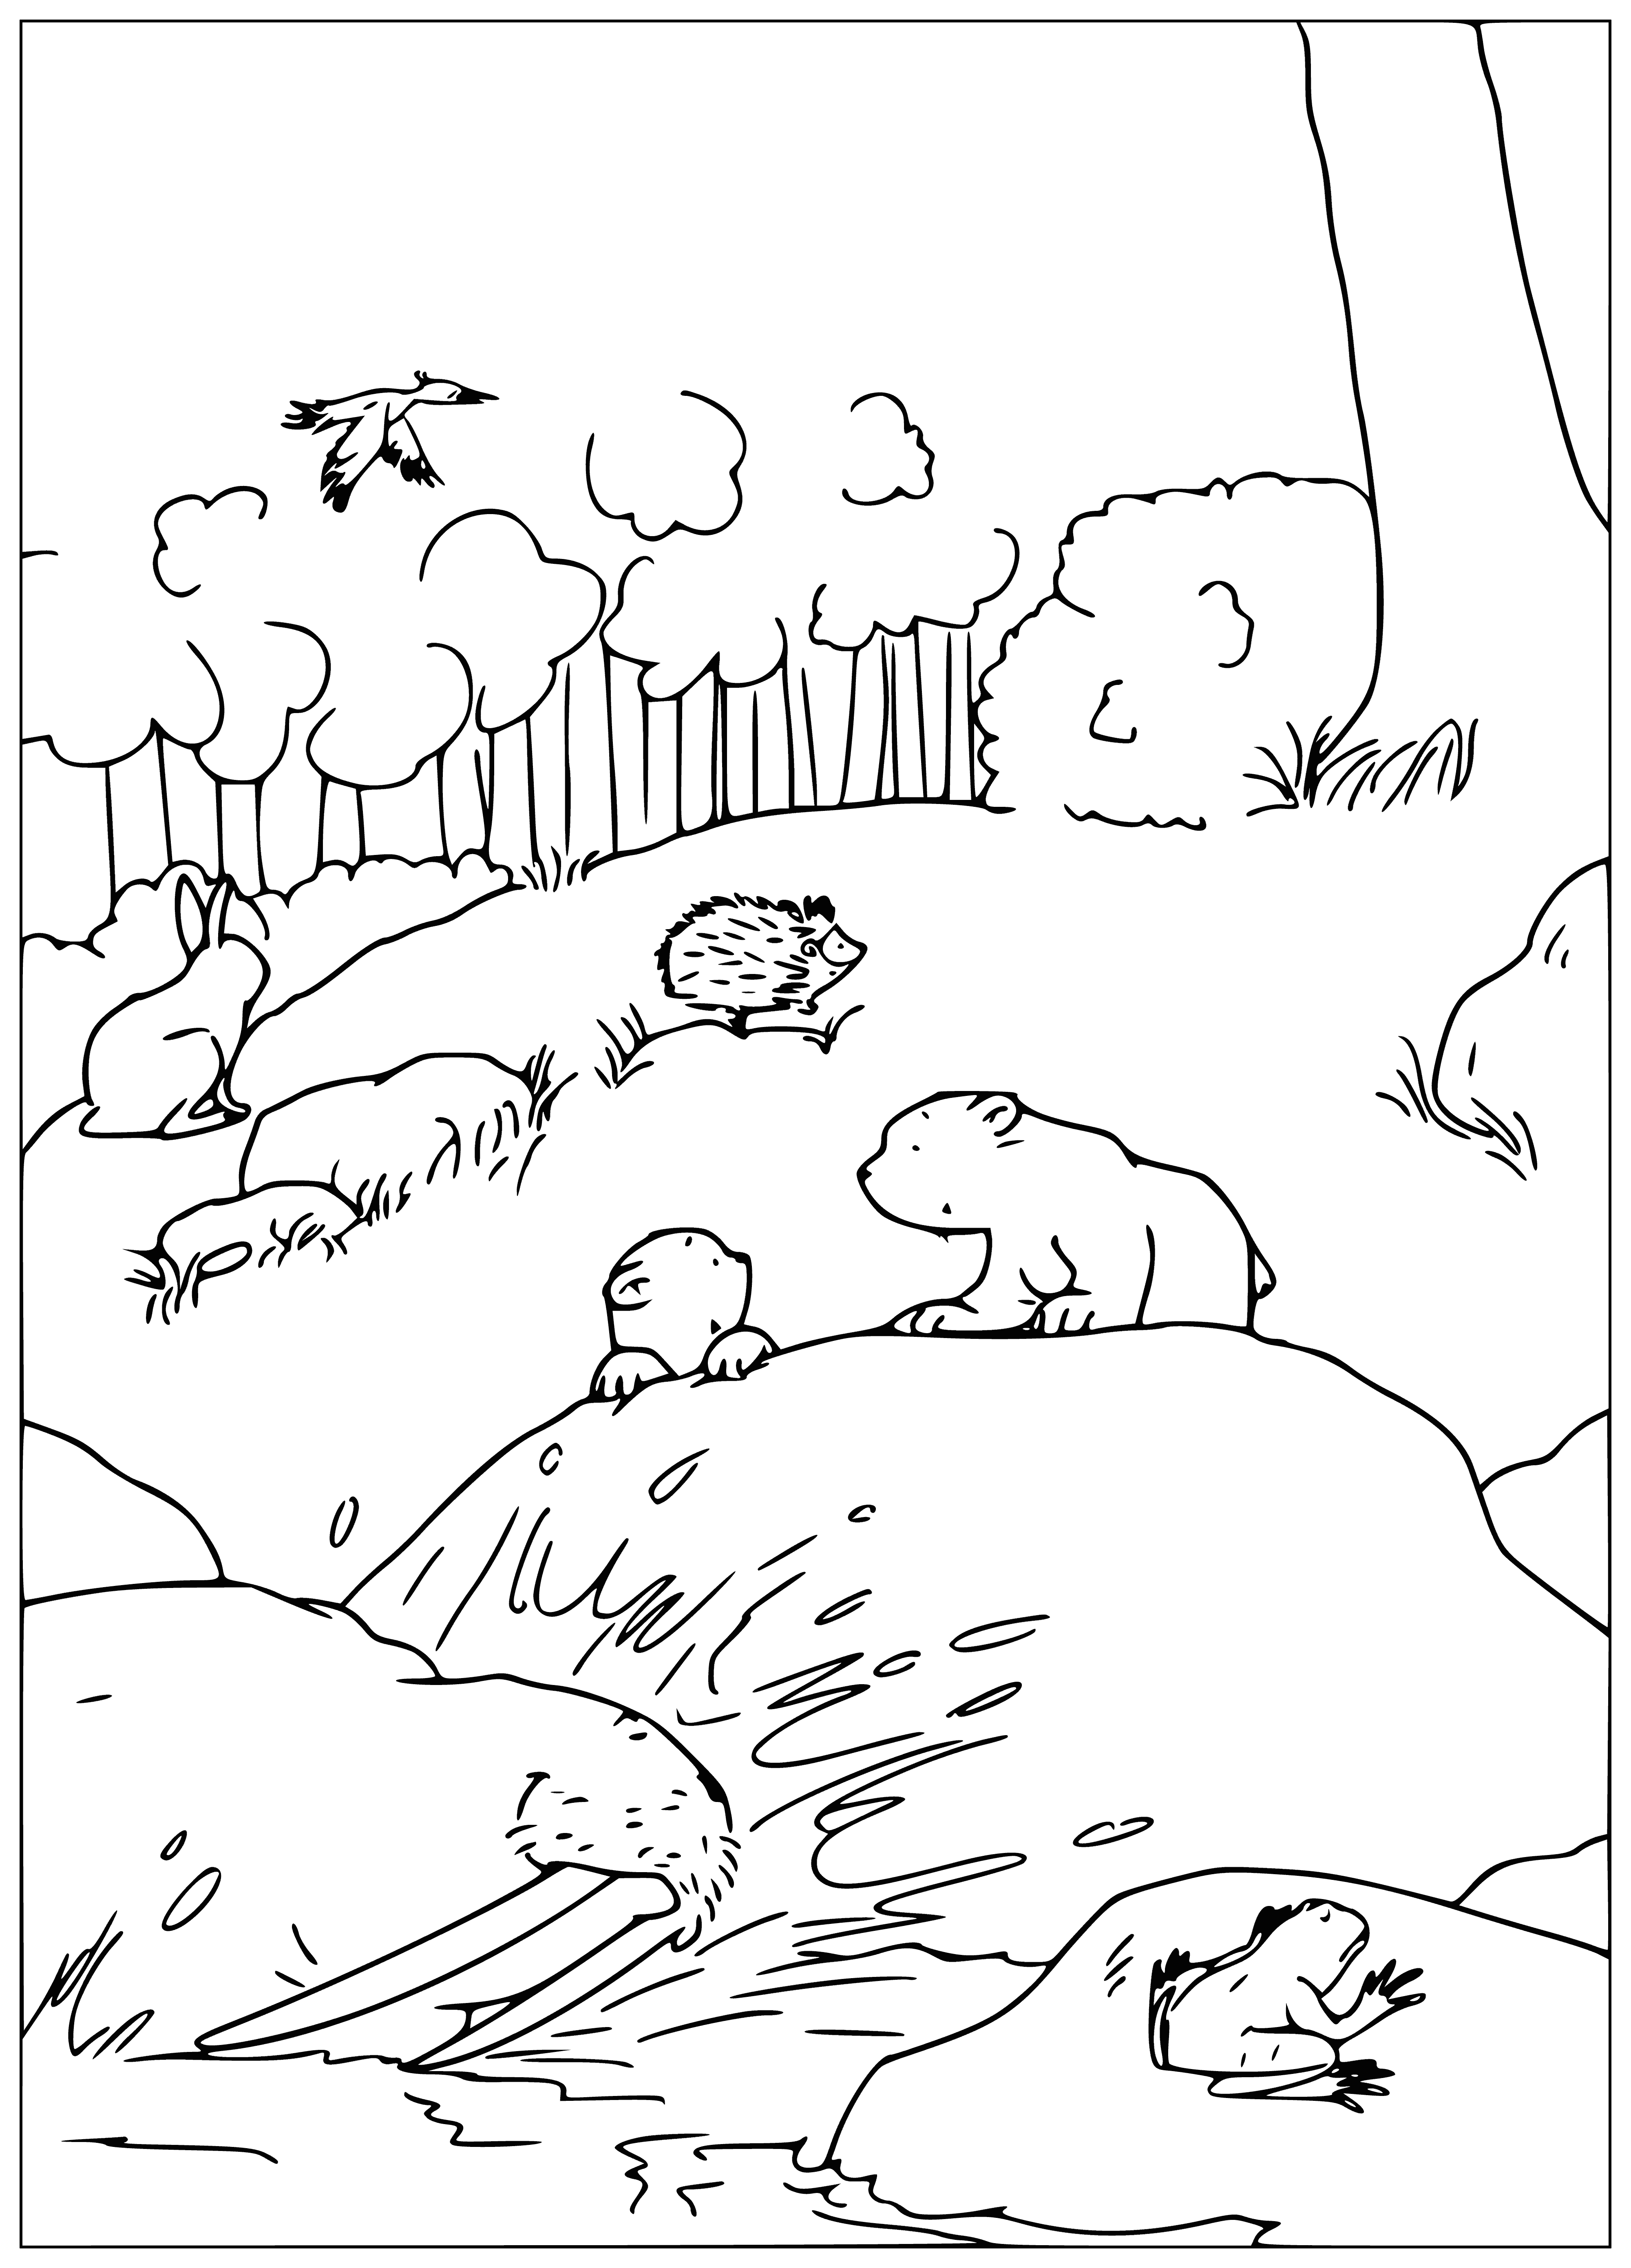 Friends on the shore coloring page